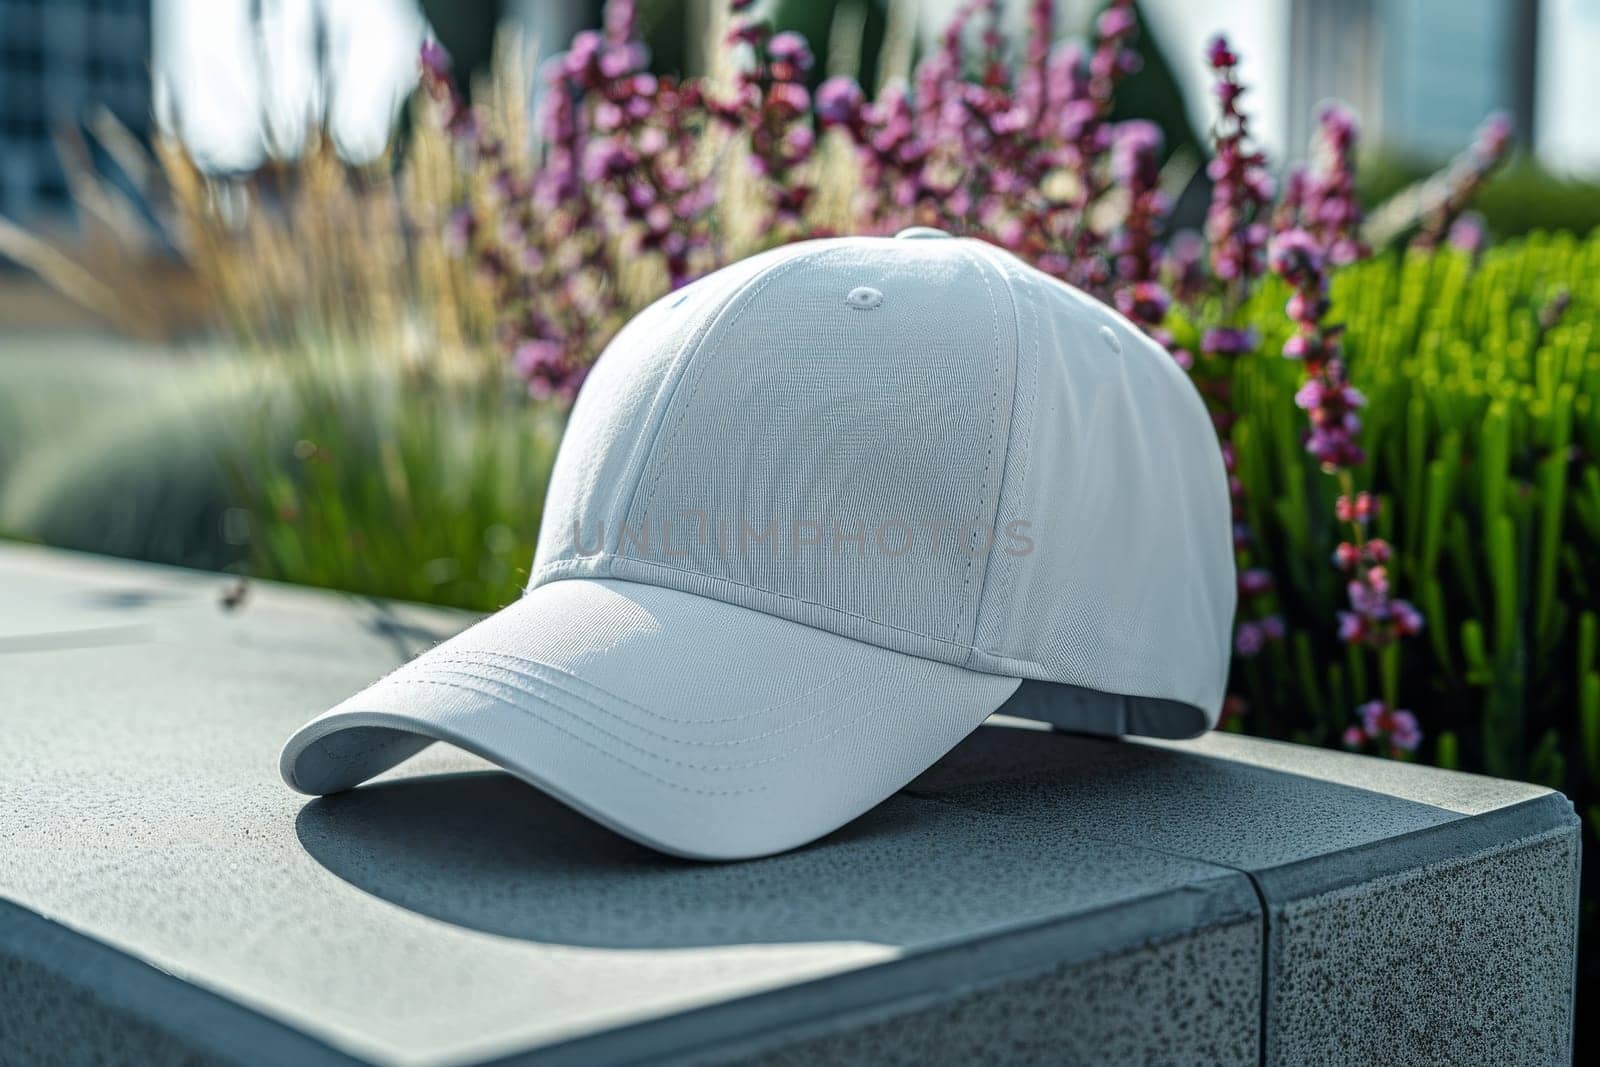 Mockup hat is sitting on a ledge next to a bush by itchaznong